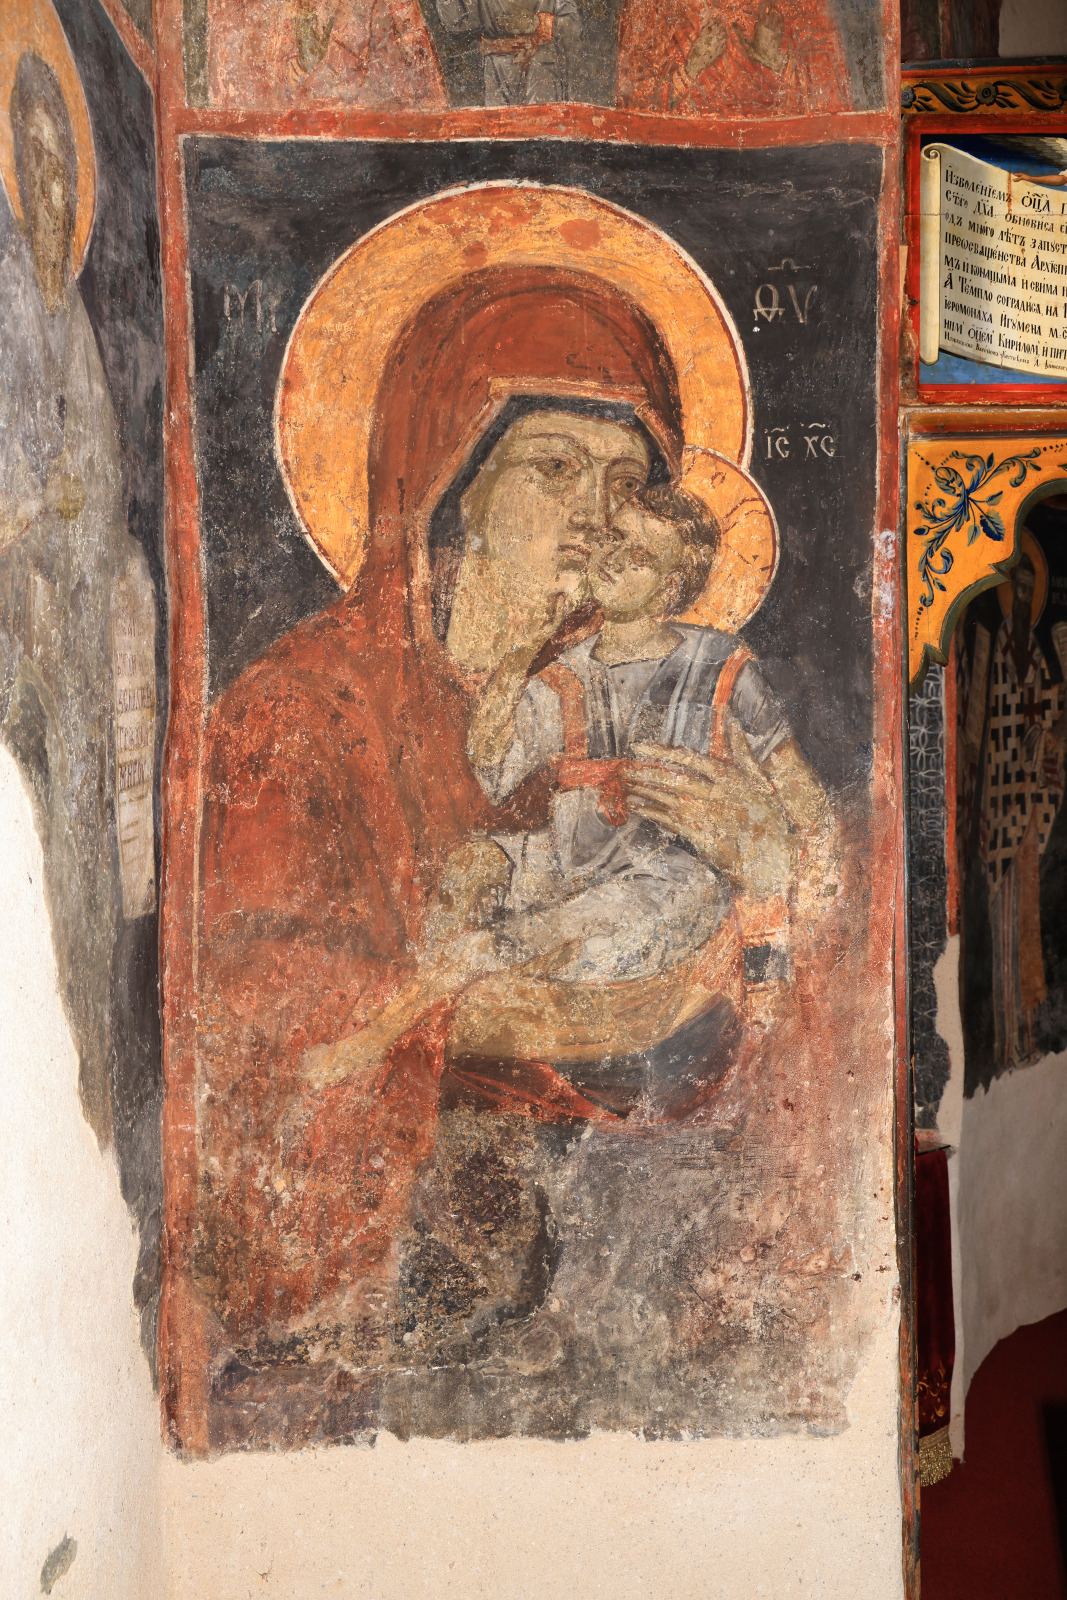 The Mother of God and Child